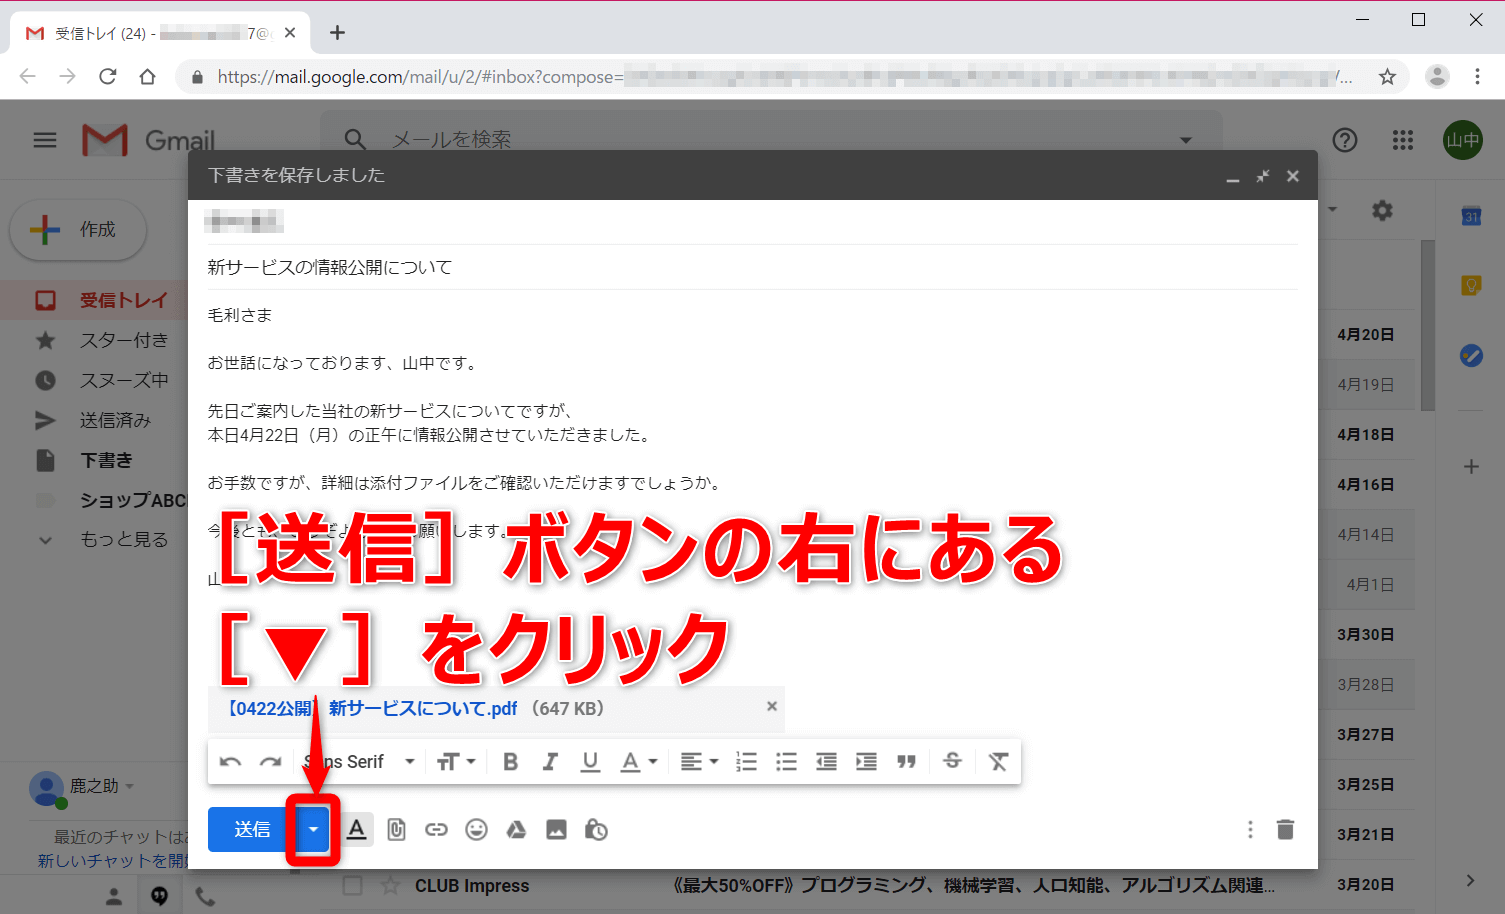 Gmail（ジーメール）のメール作成画面